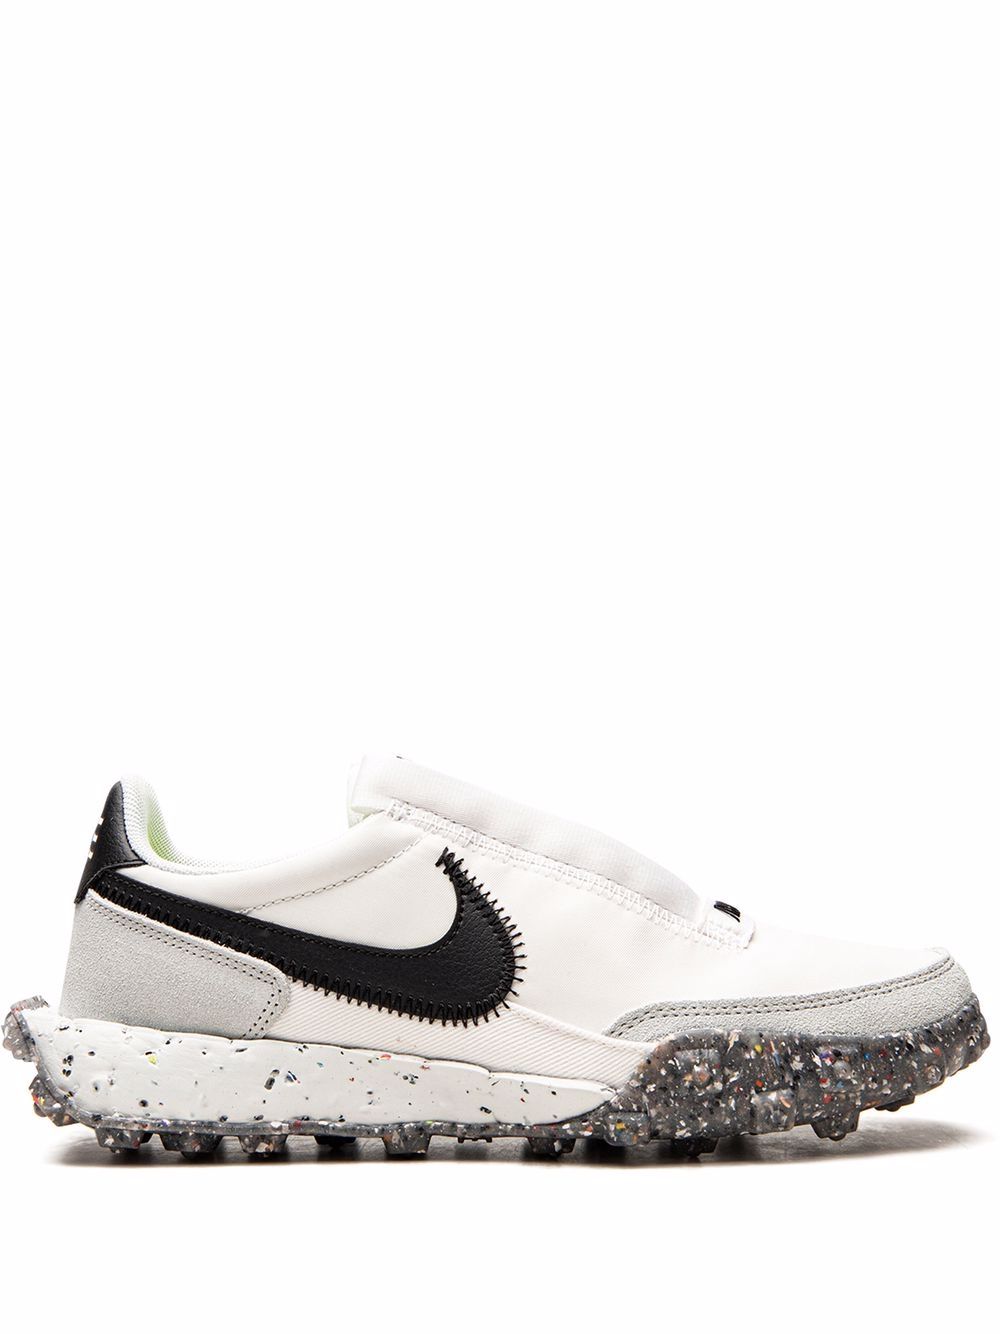 Nike Waffle Racer Crater "Summit White/Black-Photon Dust" sneakers von Nike